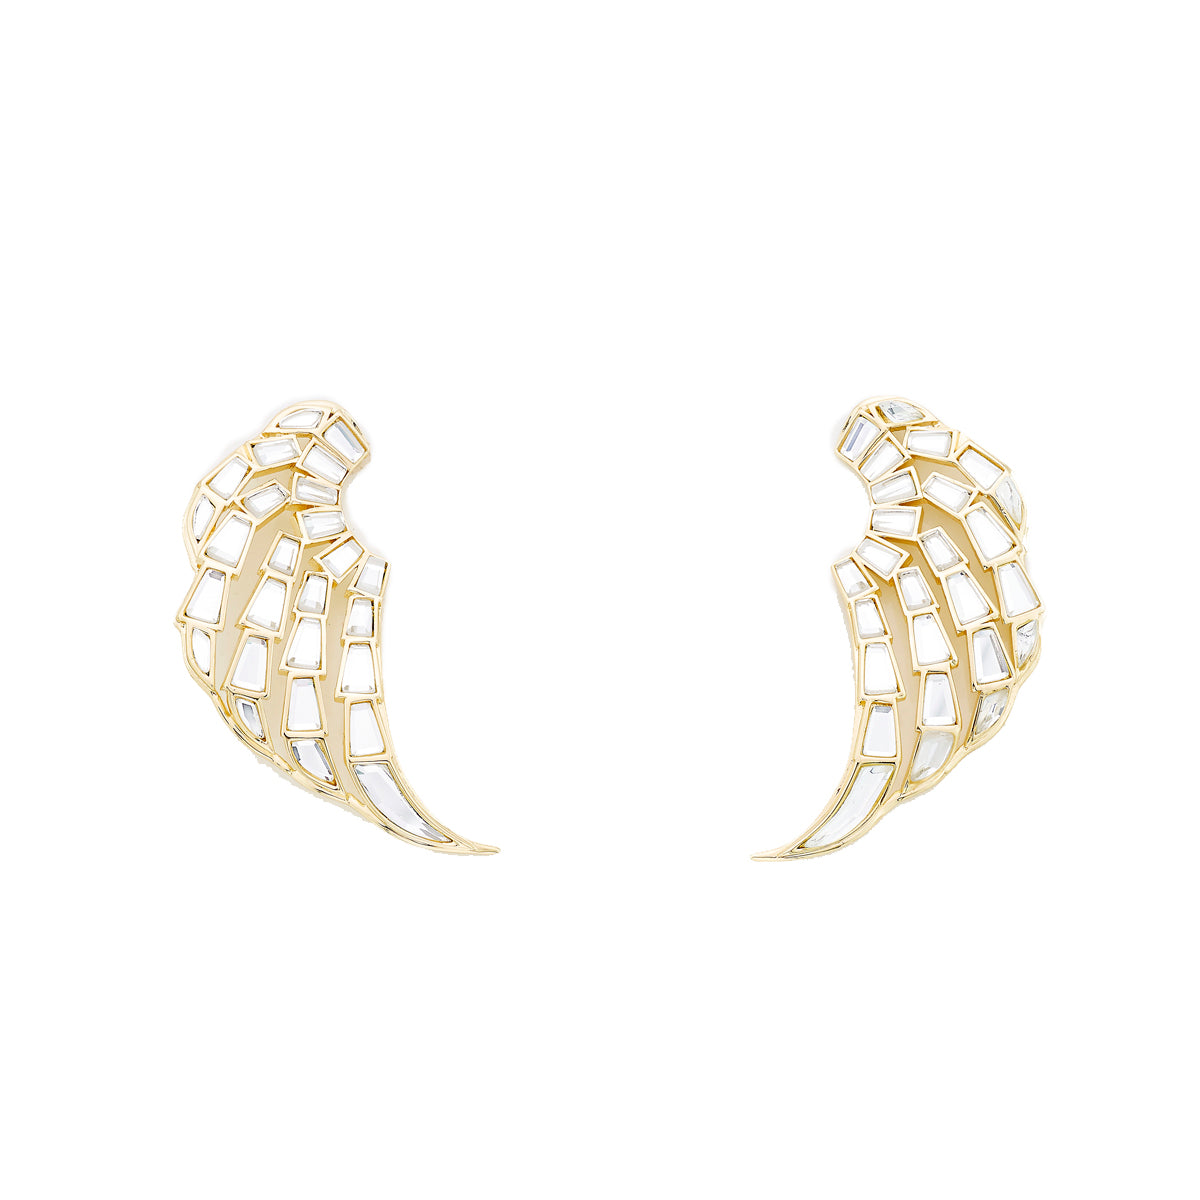 Going Angel wings as earrings? Sure, why not! Handcrafted with mirror and gold plated brass.